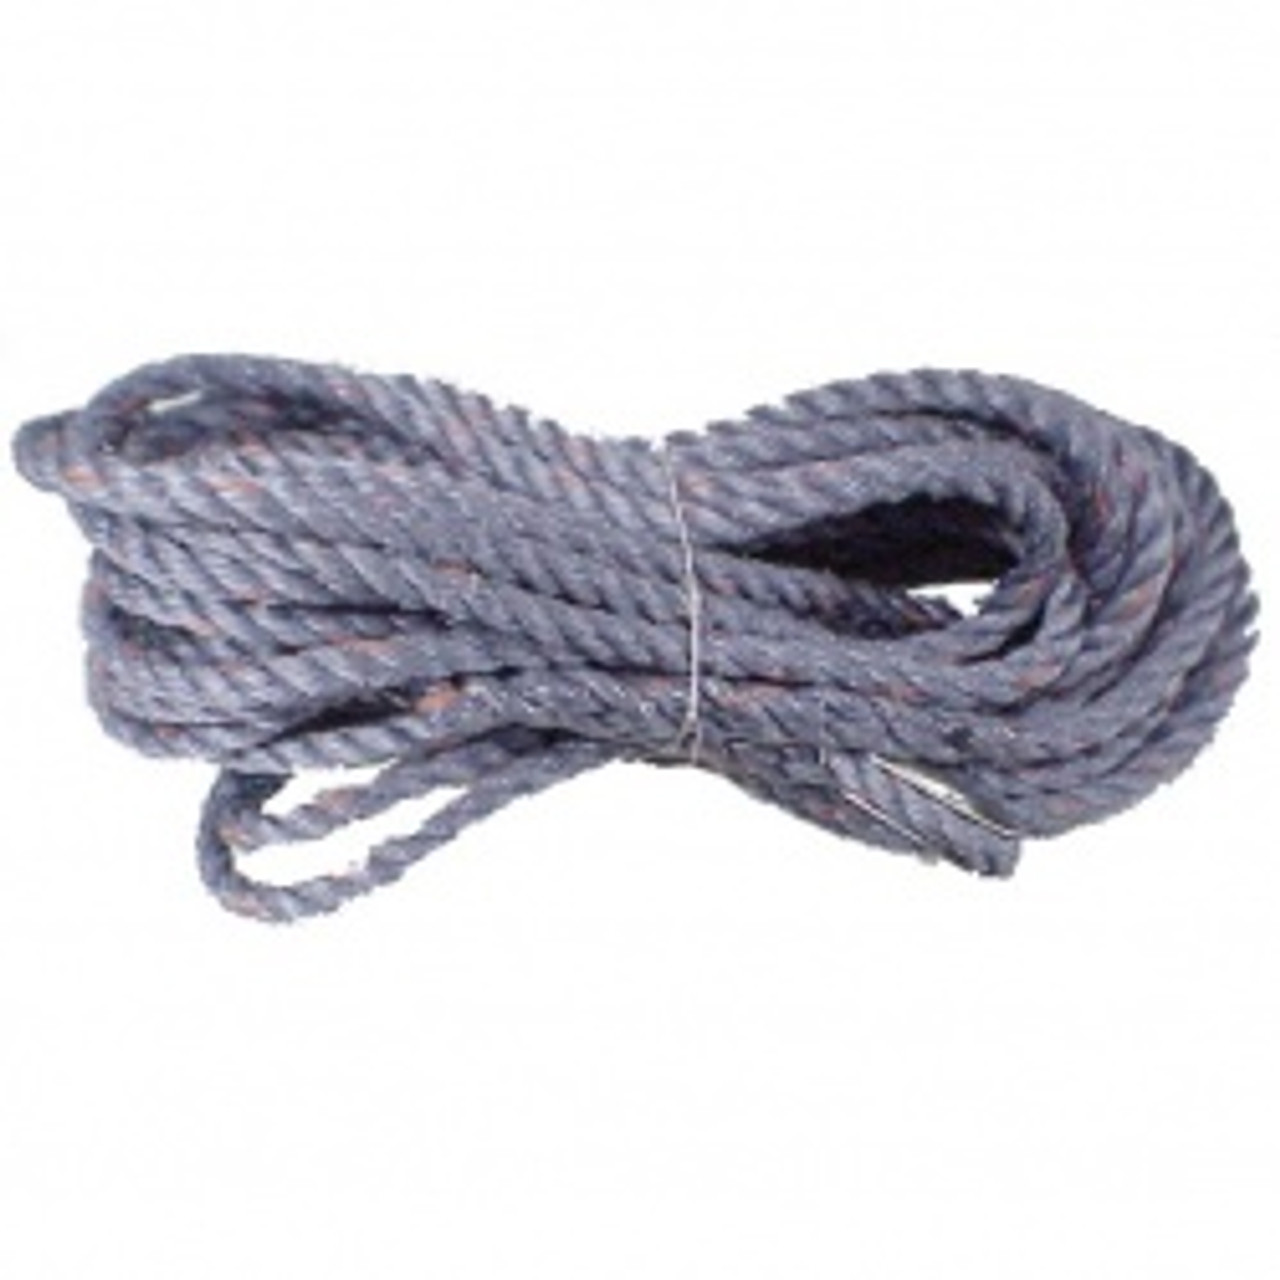 Co-Polymer Prosteel Rope w/ Thimble End, UV Resistant